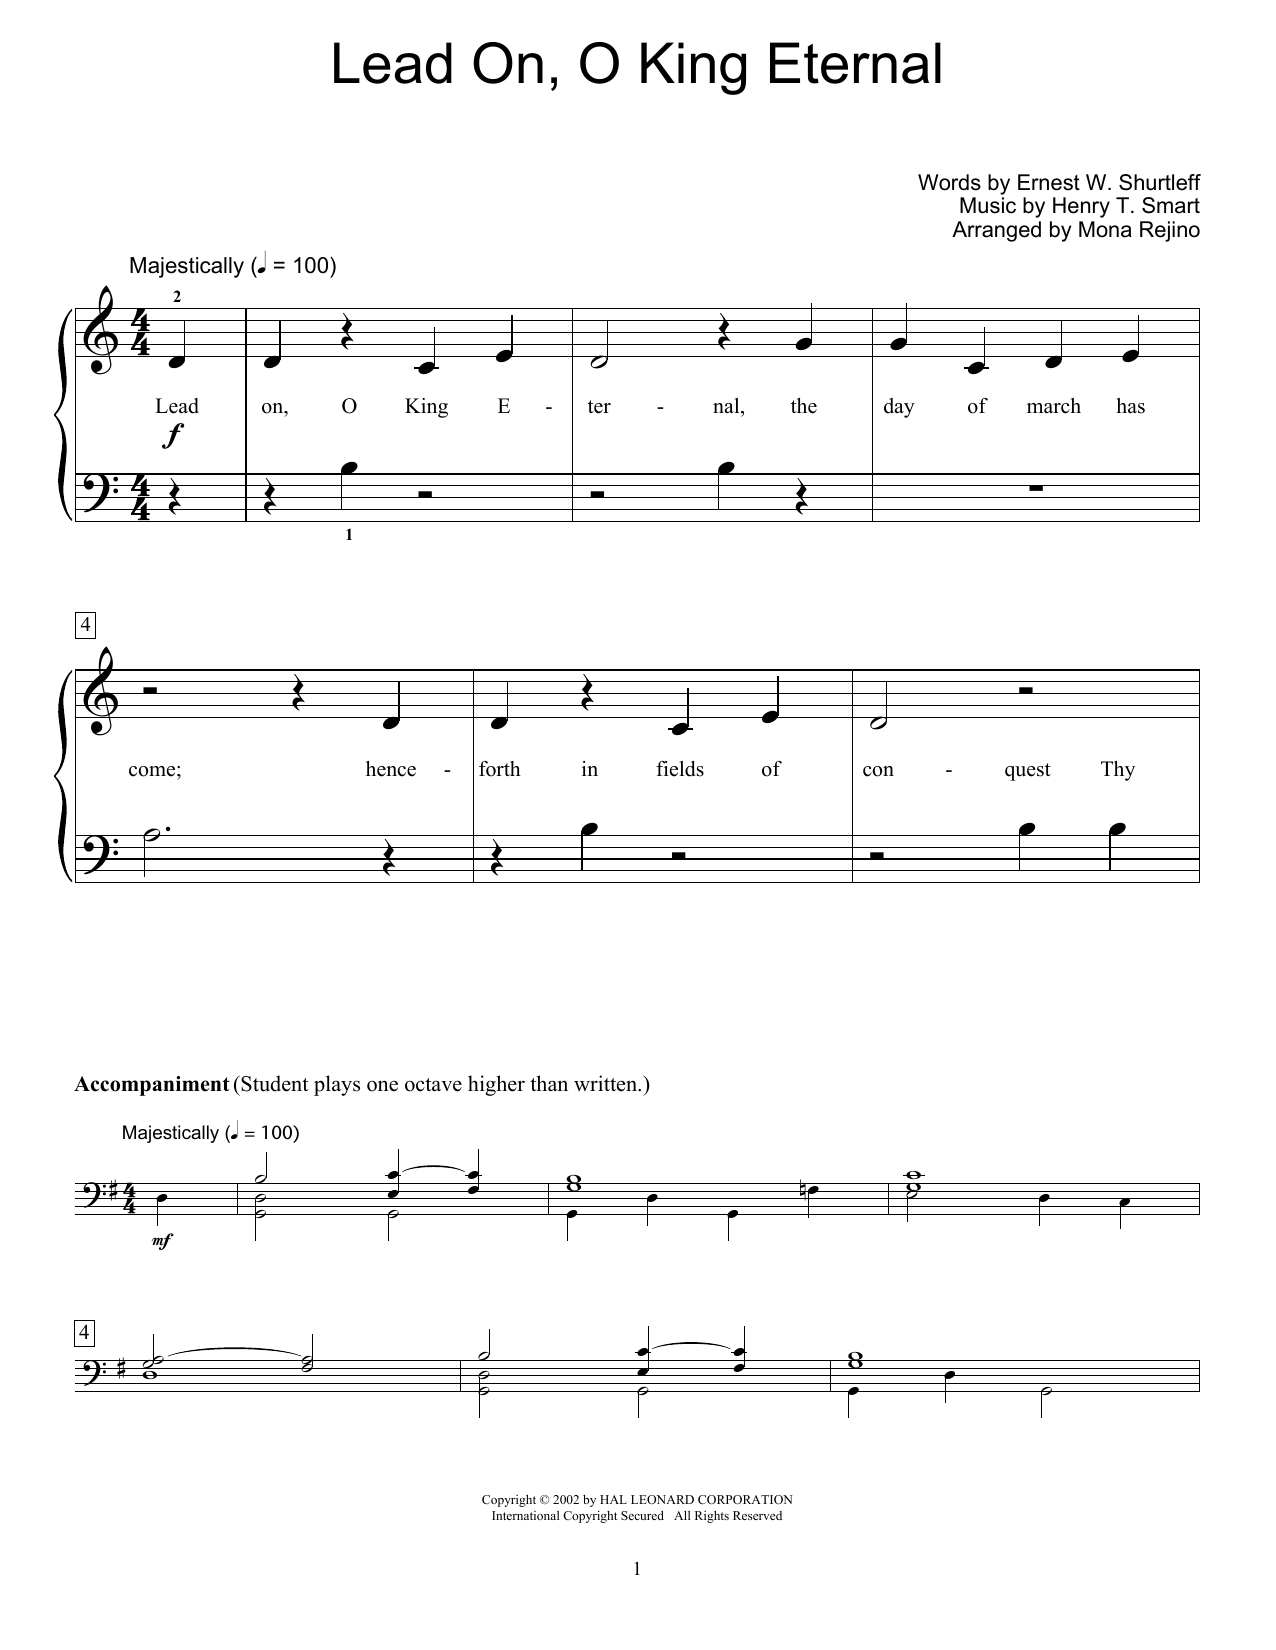 Henry T. Smart Lead On, O King Eternal (arr. Mona Rejino) sheet music notes and chords. Download Printable PDF.